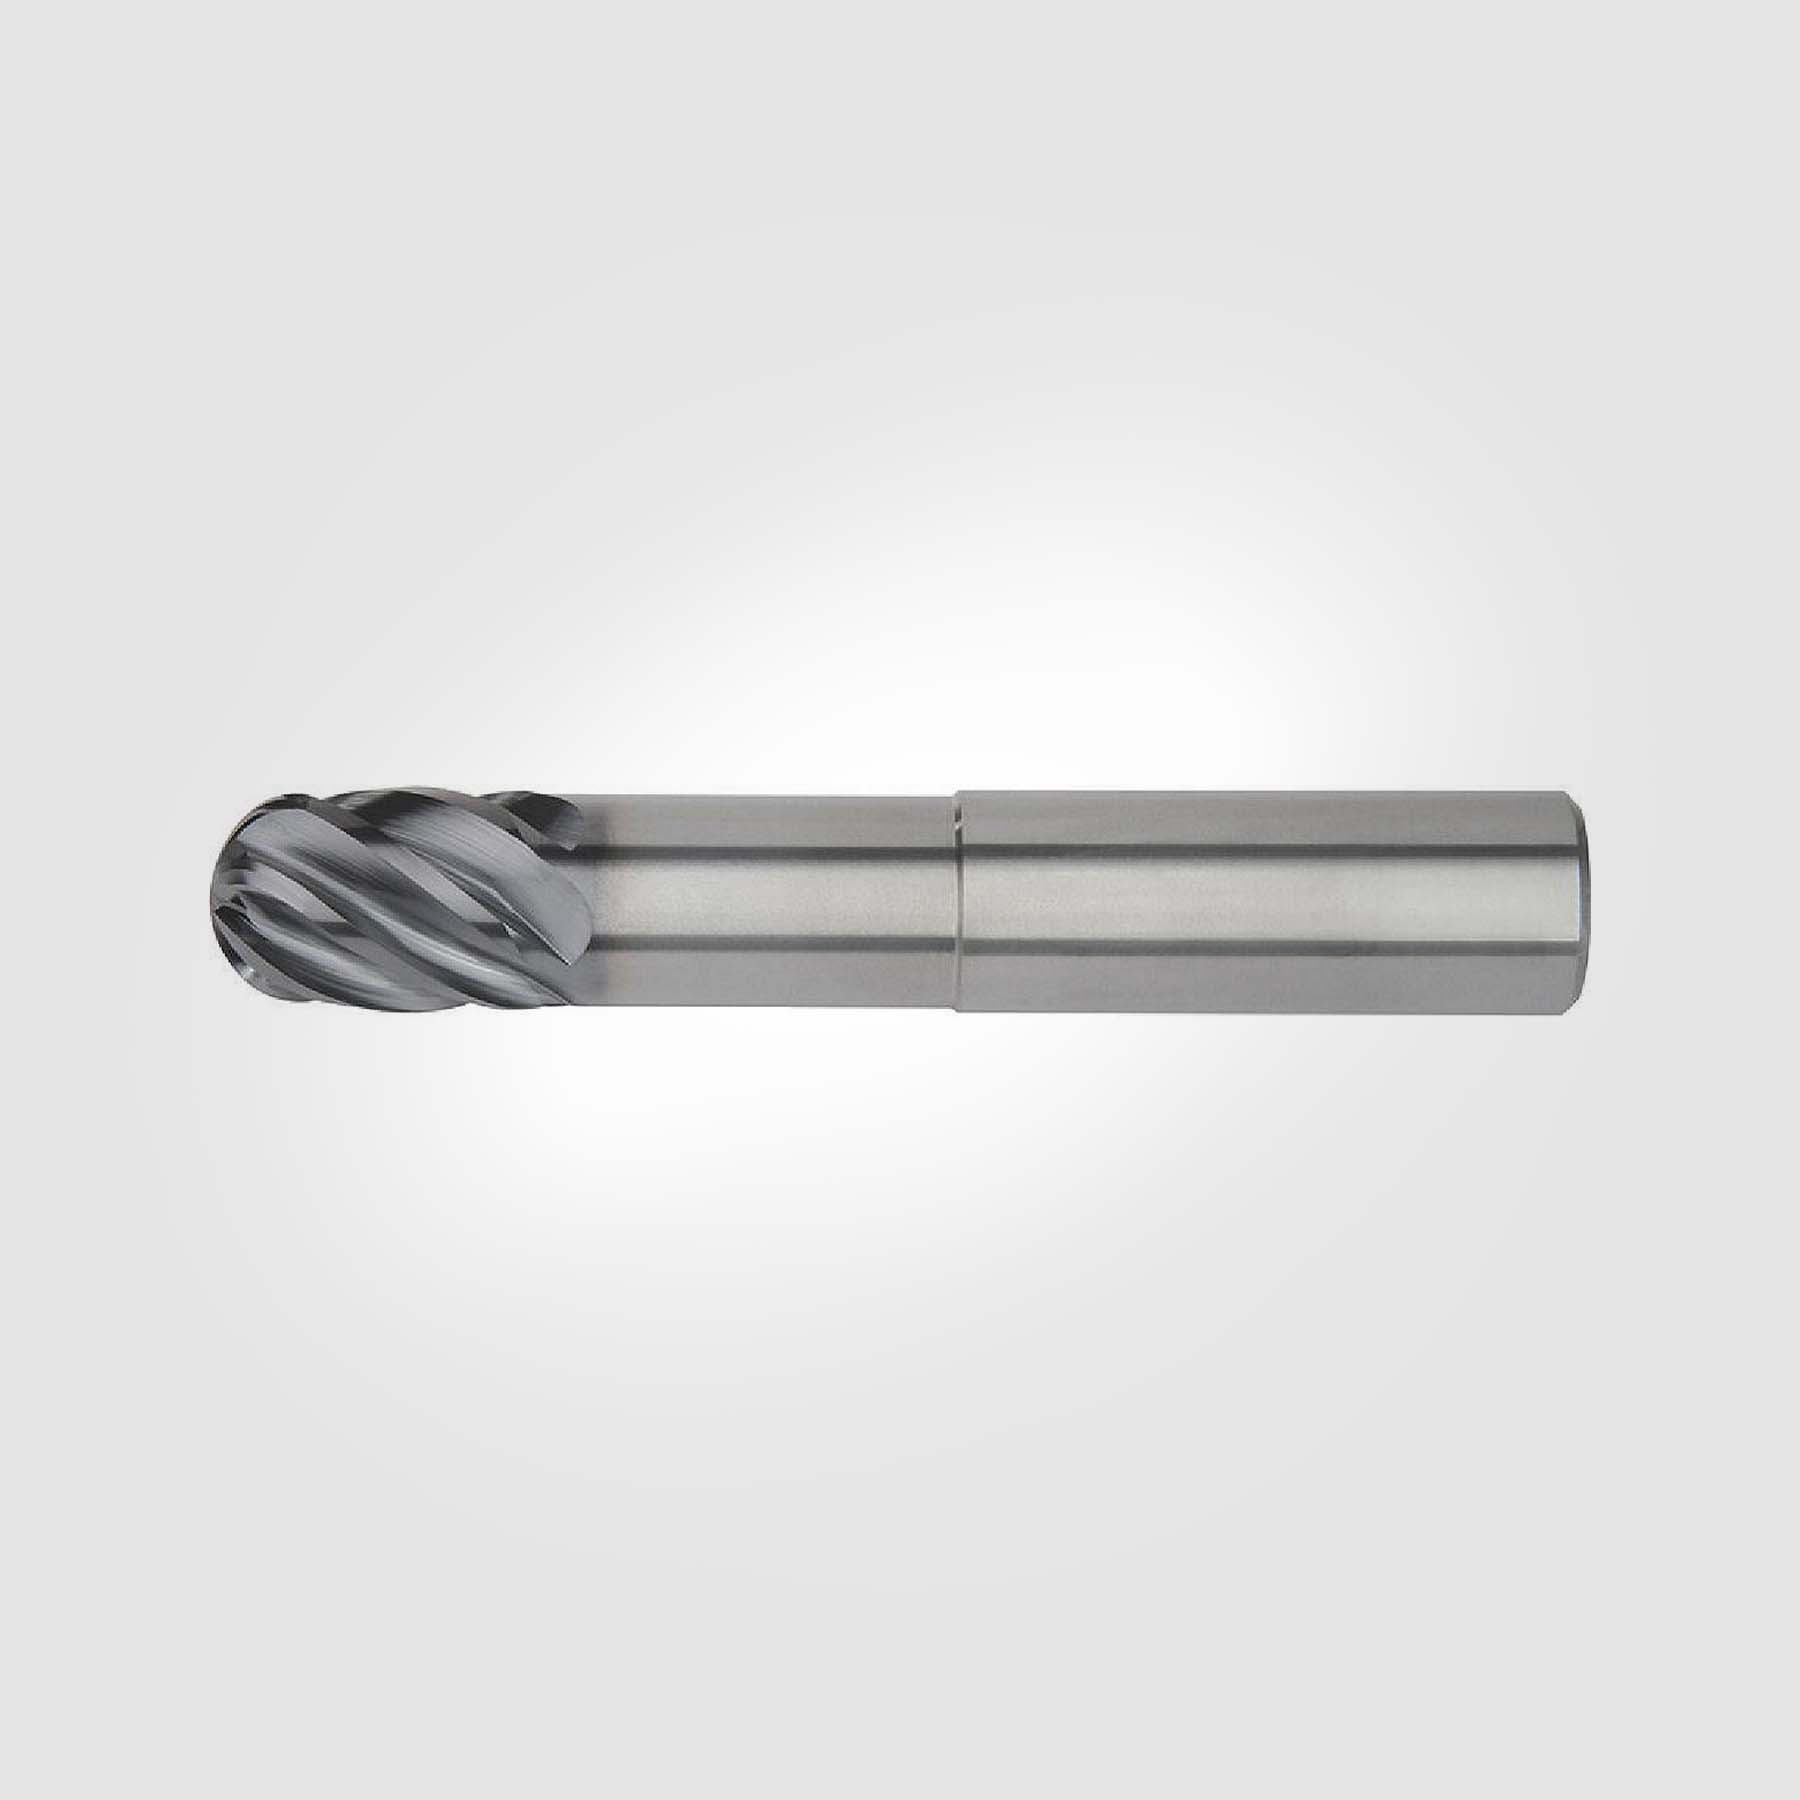 HARVI III (BALL NOSE) | 1/2" x 1/2" x 5/8" x 6" | SOLID CARBIDE NECKED ENDMILL 6 FLUTE | 5607301